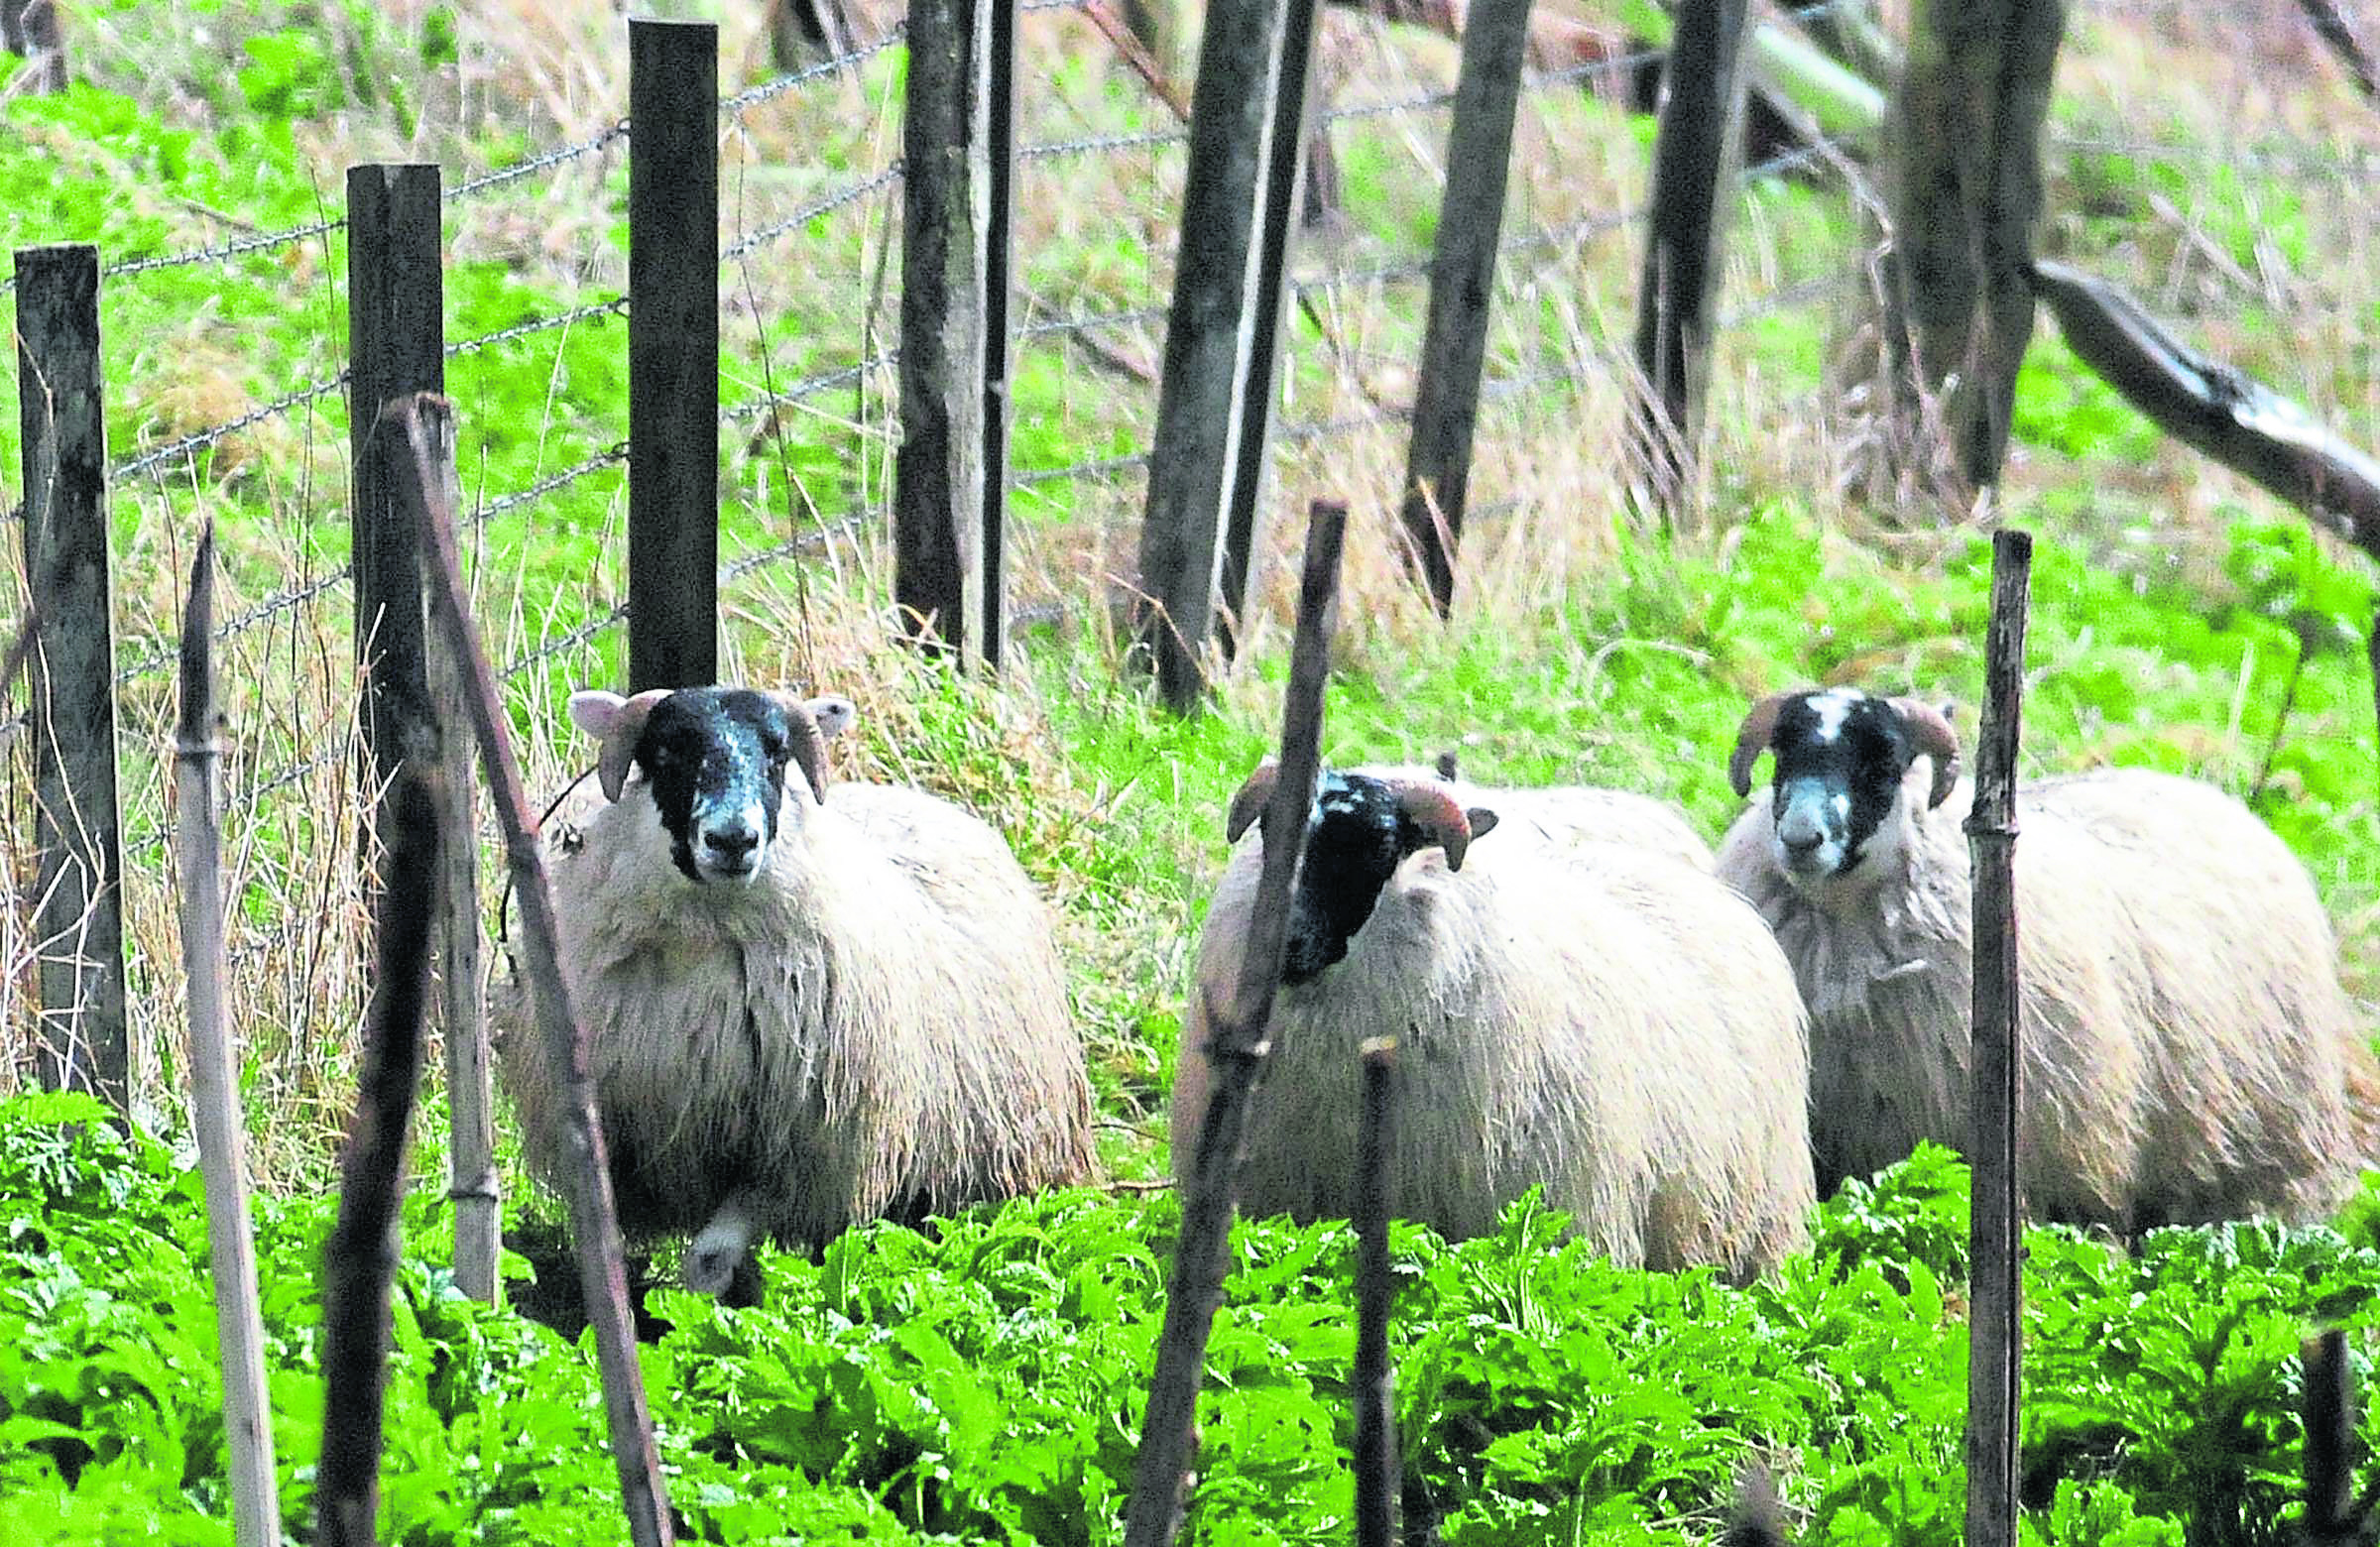 Black faced sheep graze on newly sprouting Giant Hogweed near the River Deveron in Aberdeenshire.